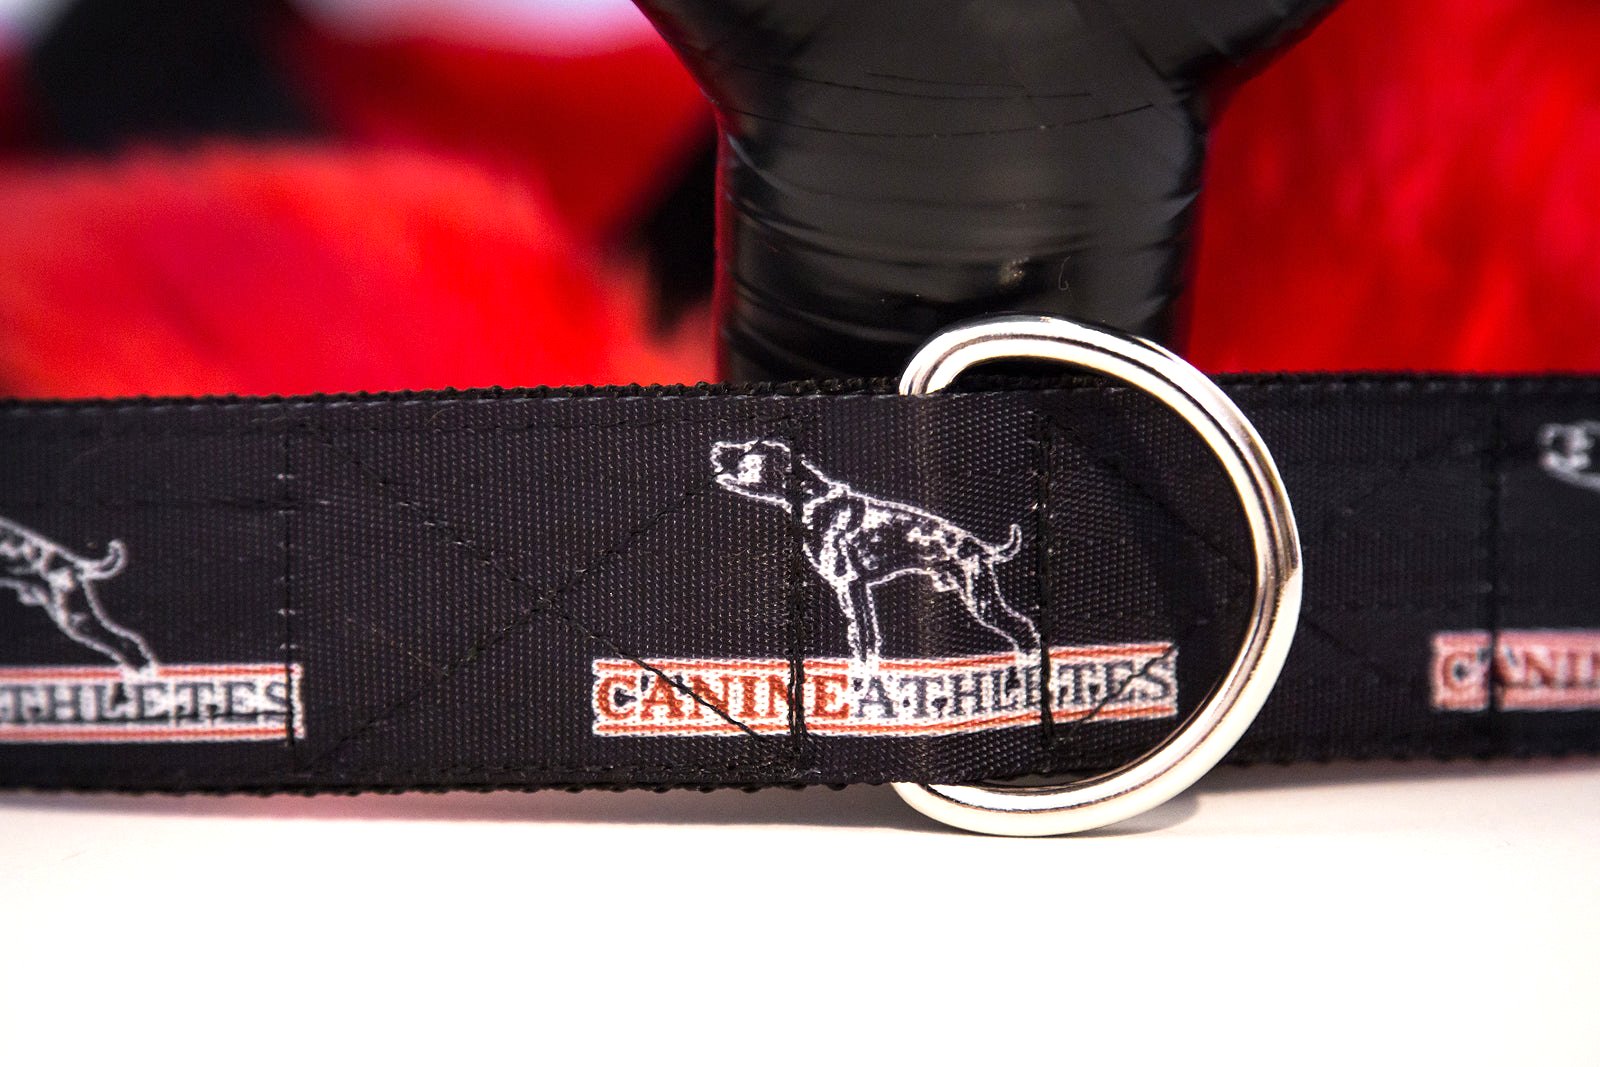 Canine Athletes X SMT Competition Weight Pull Dog Harness